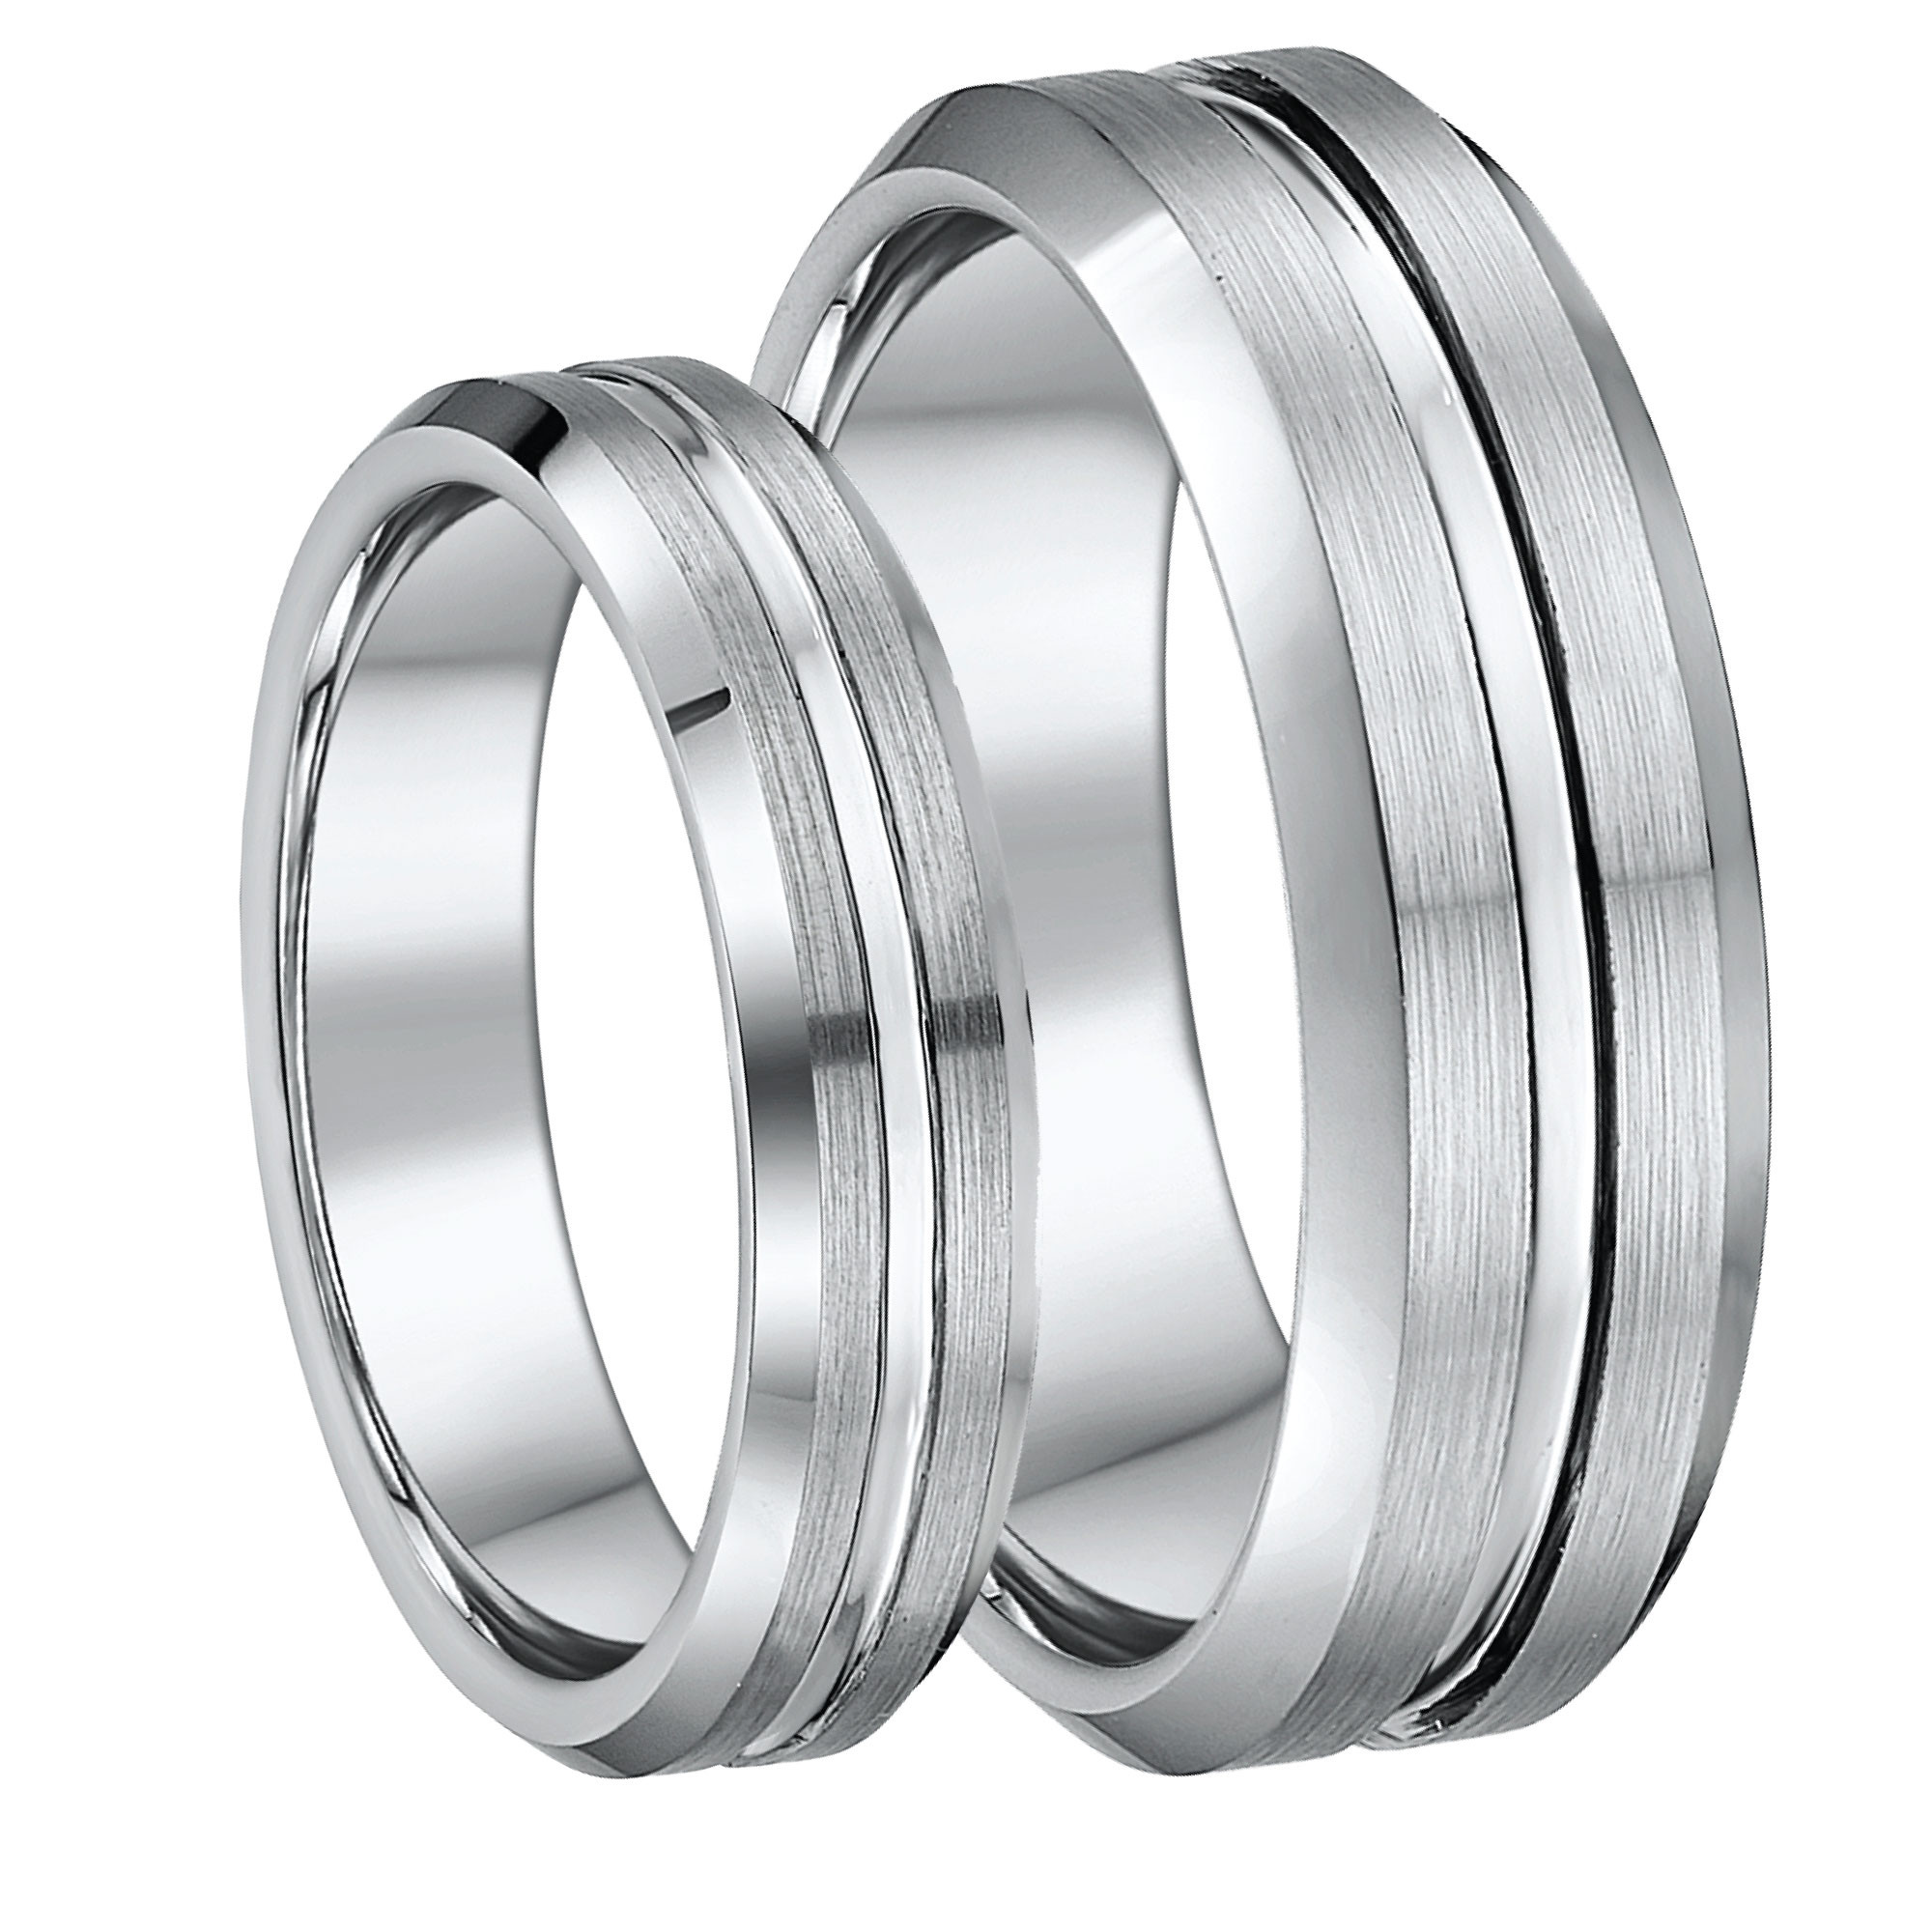 Tungsten Wedding Ring Sets
 His & Hers 5mm & 7mm Tungsten Wedding Ring Set Tungsten